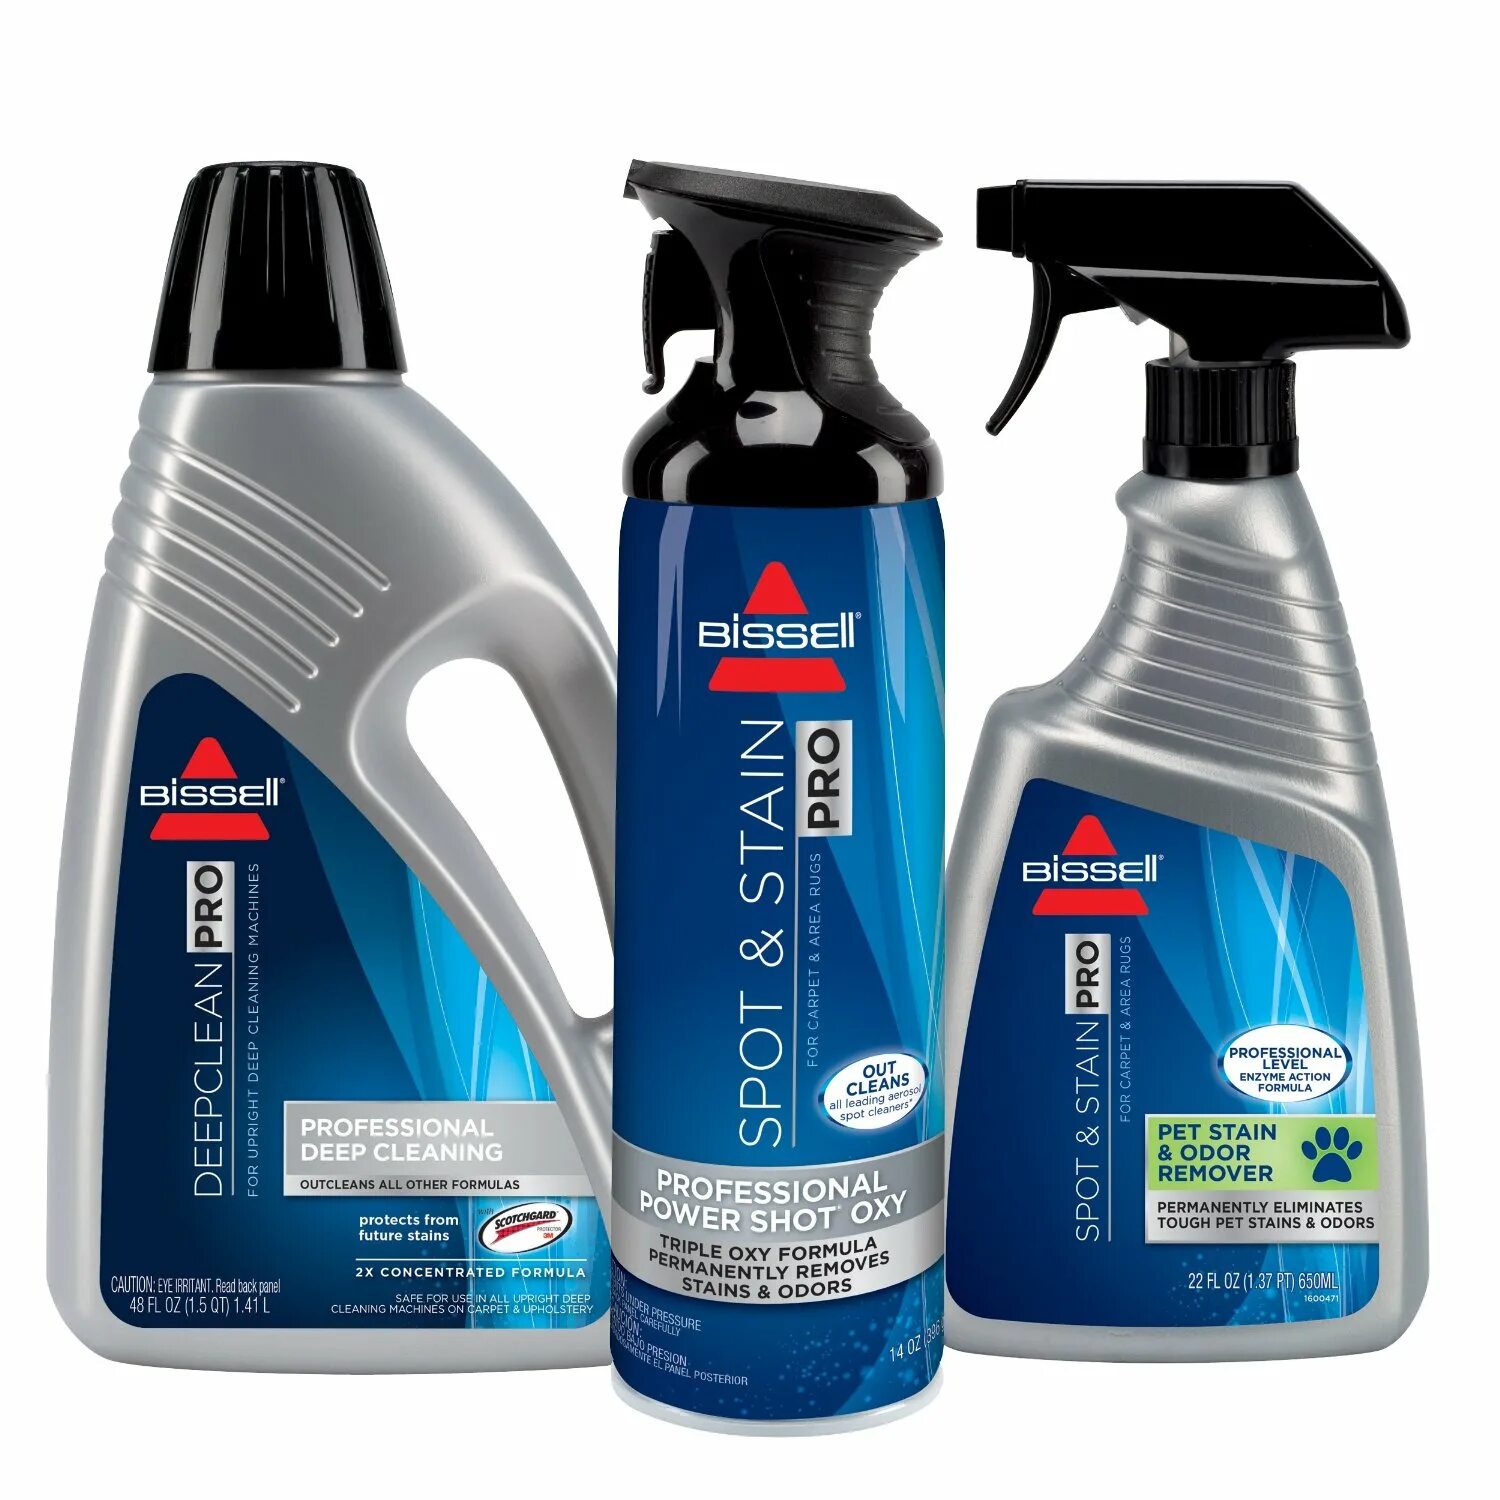 Full cleaning. Bissell Deep clean+protect что это. Bissell. Bissell средство. Bissell моющее средство.